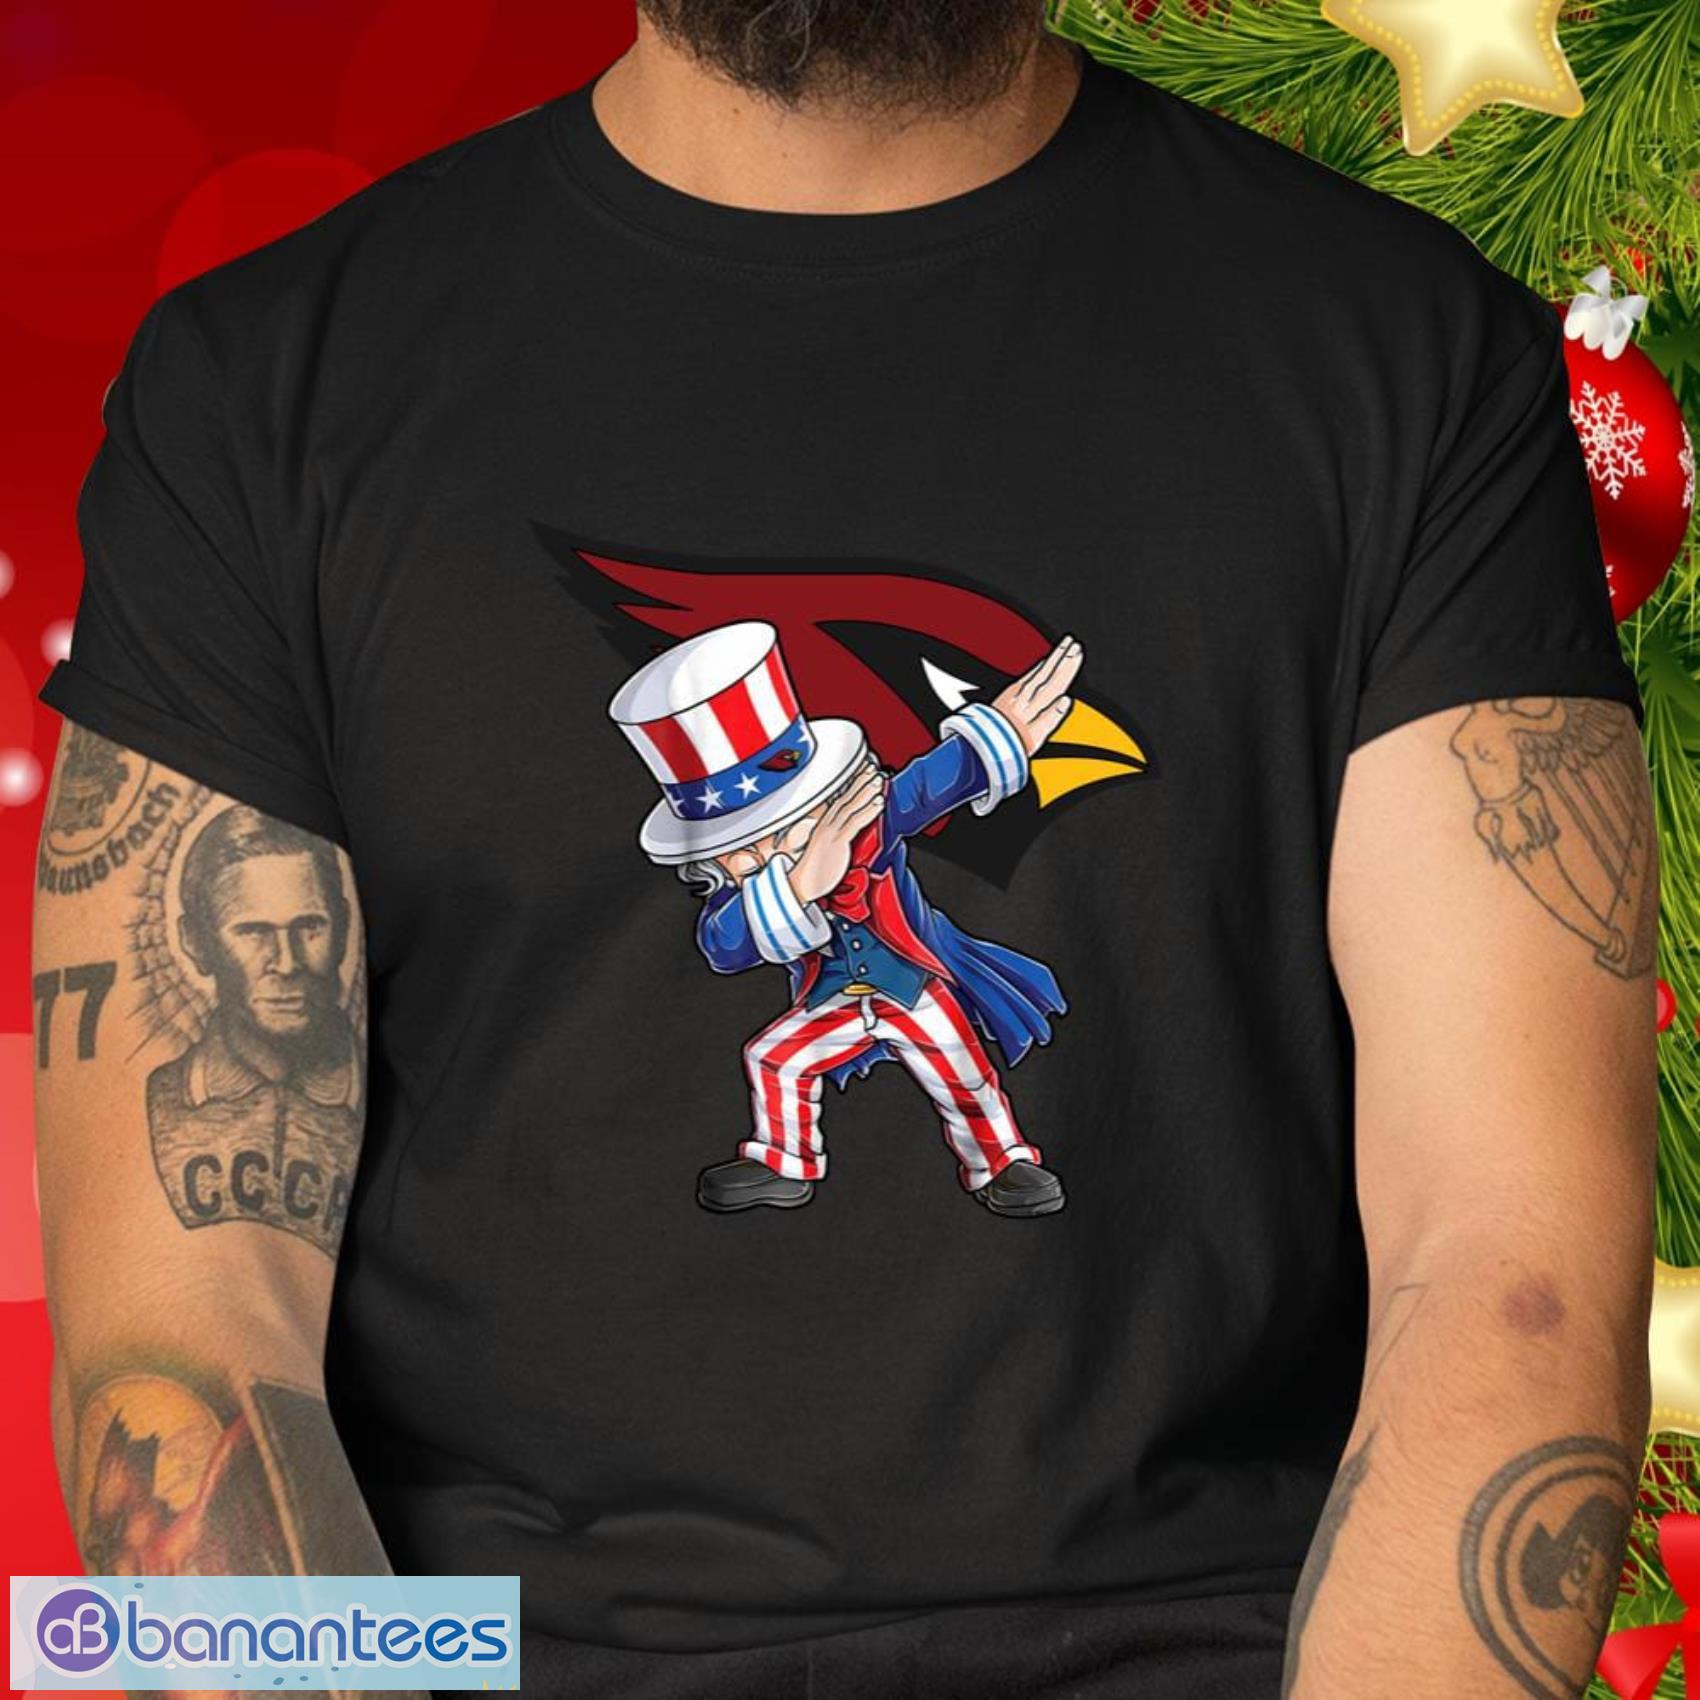 Arizona Cardinals NFL Football Gift Fr Fans Dabbing Uncle Sam The Fourth of July T Shirt - Arizona Cardinals NFL Football Dabbing Uncle Sam The Fourth of July T Shirt_2